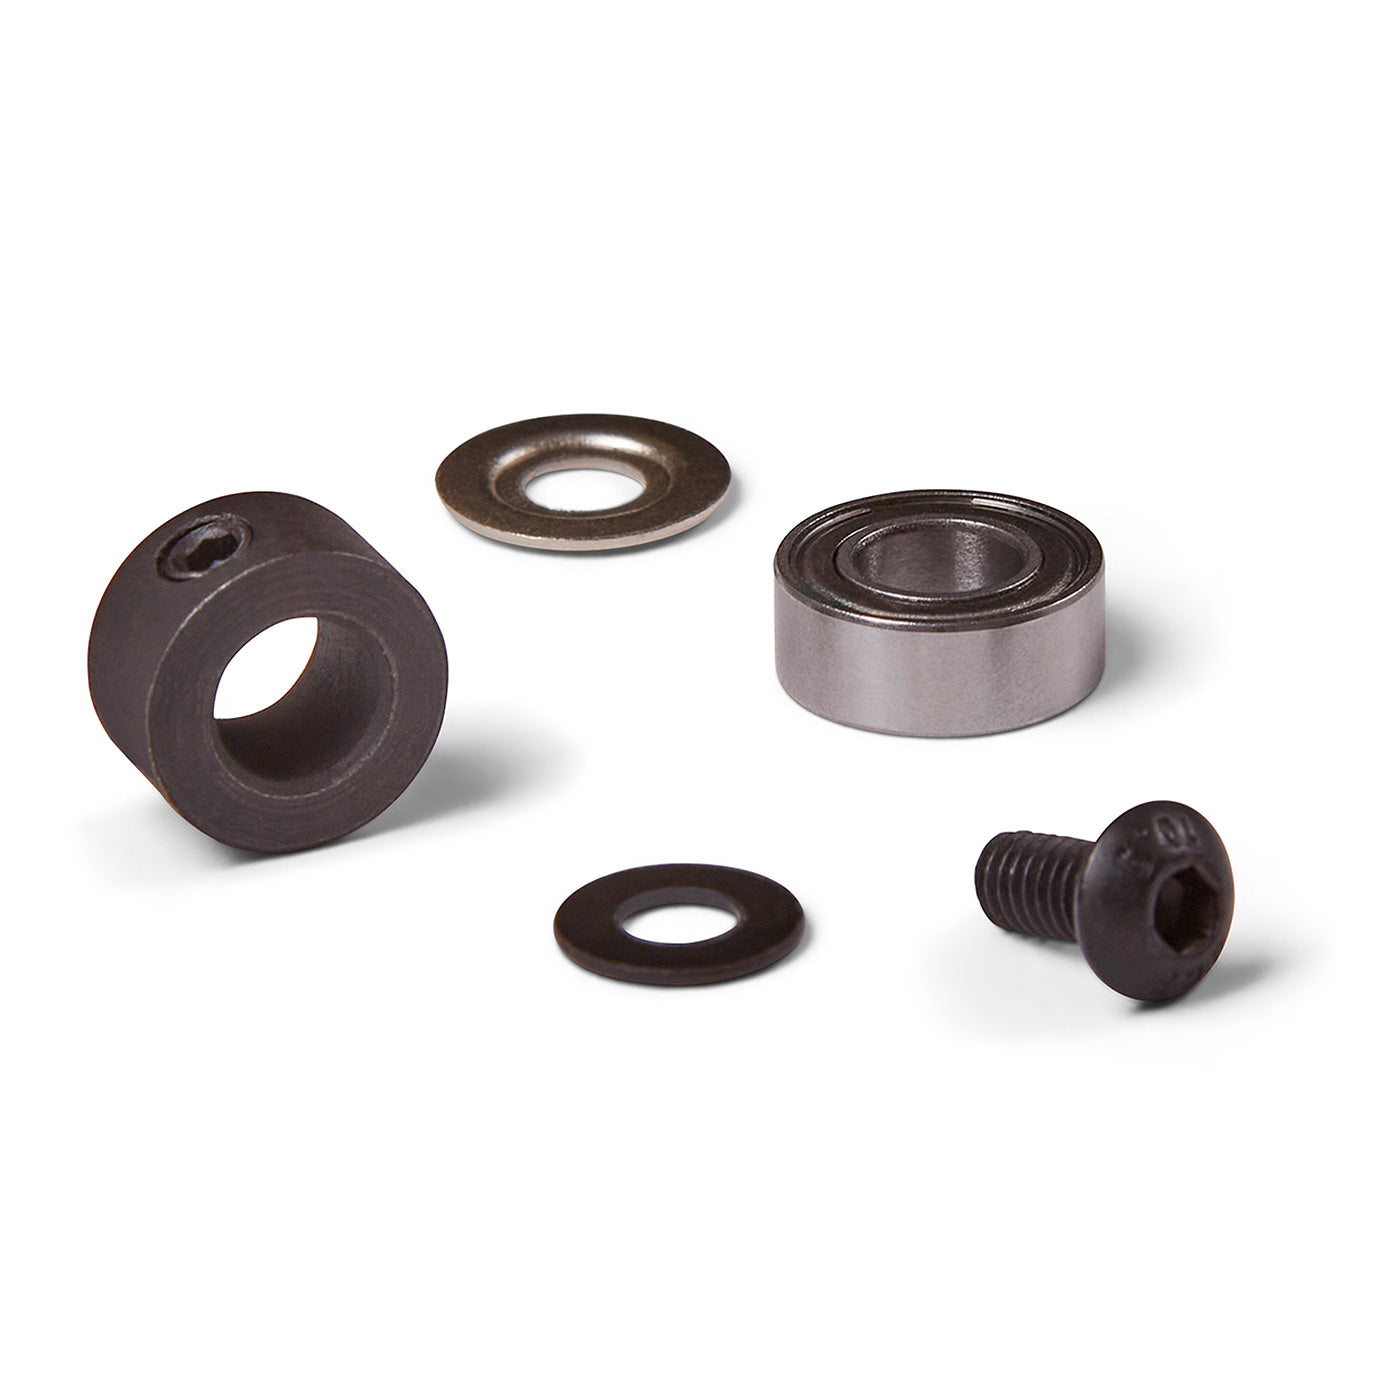 Bearing Kit for R852, R5854 and R5856  